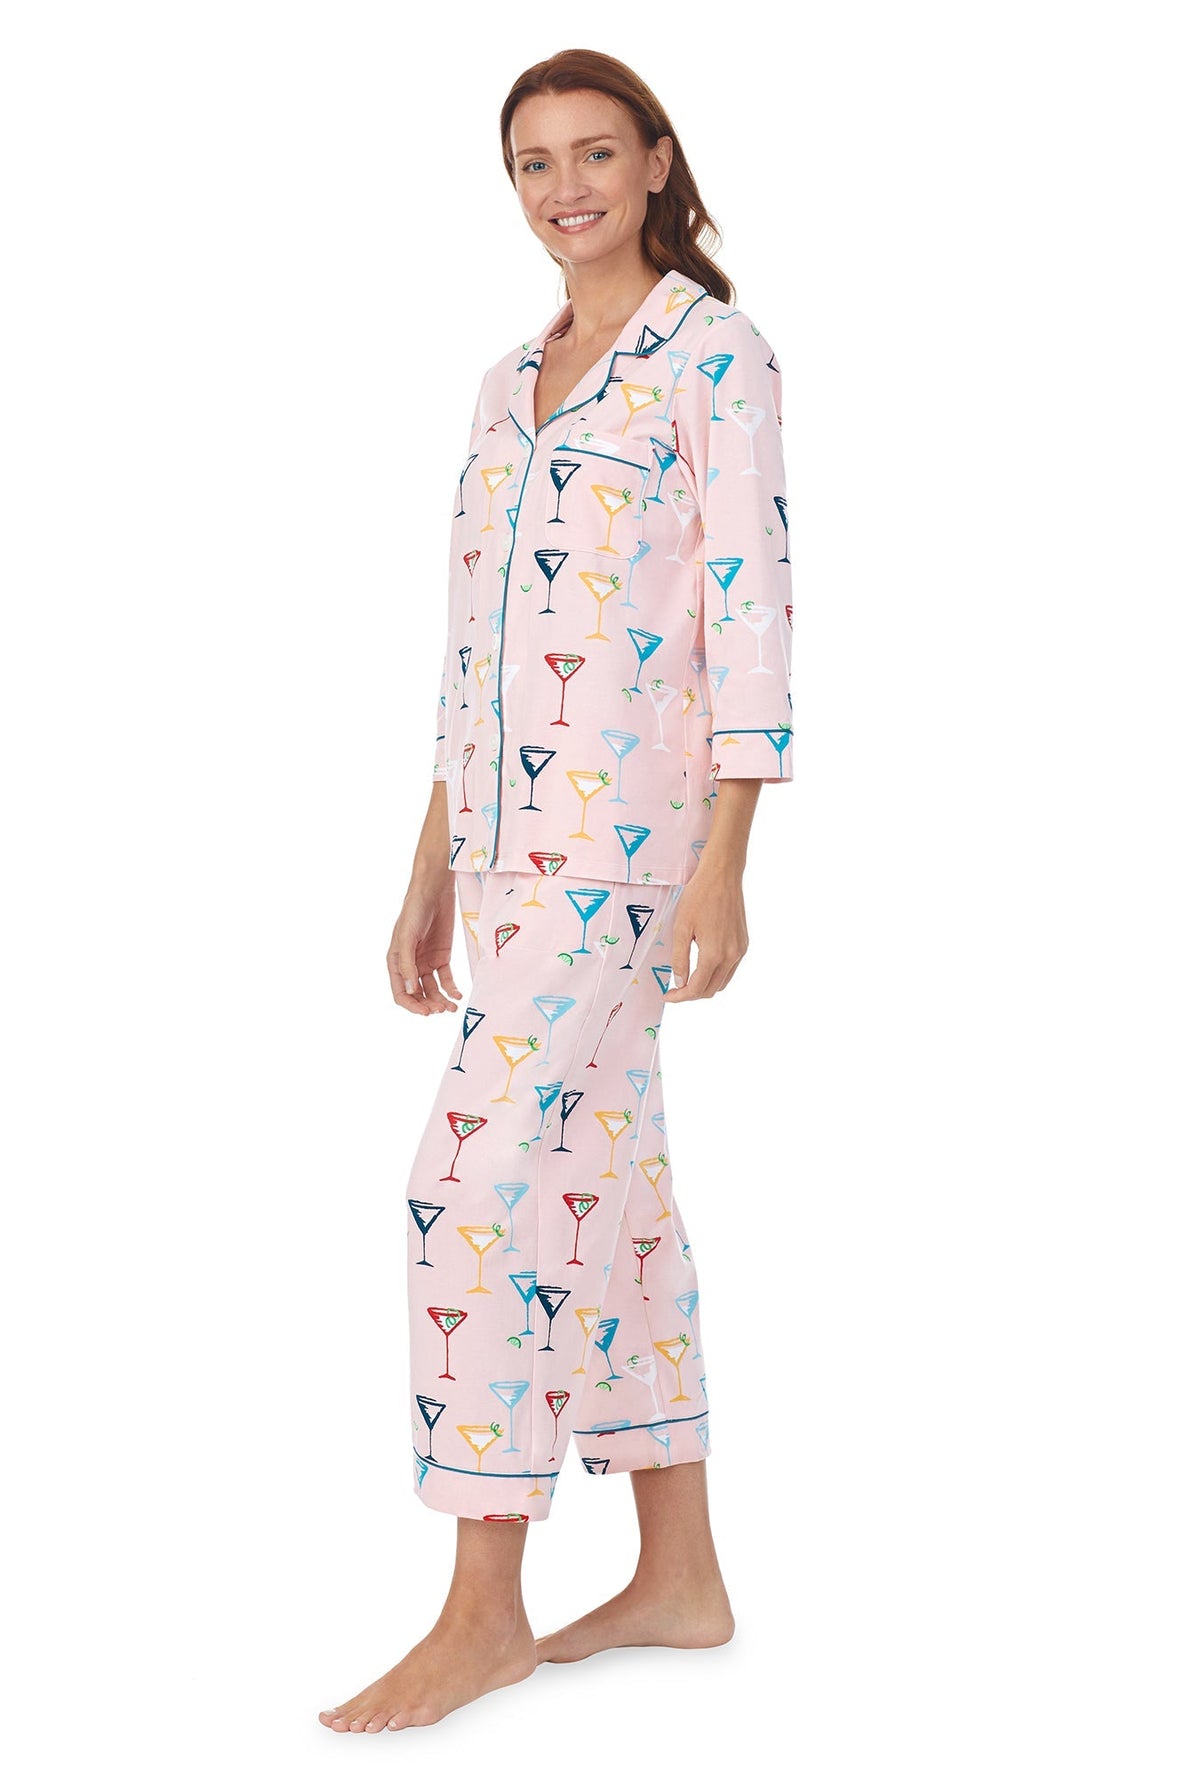 A lady wearing a pink quarter sleeve cropped pj set with glass pattern.